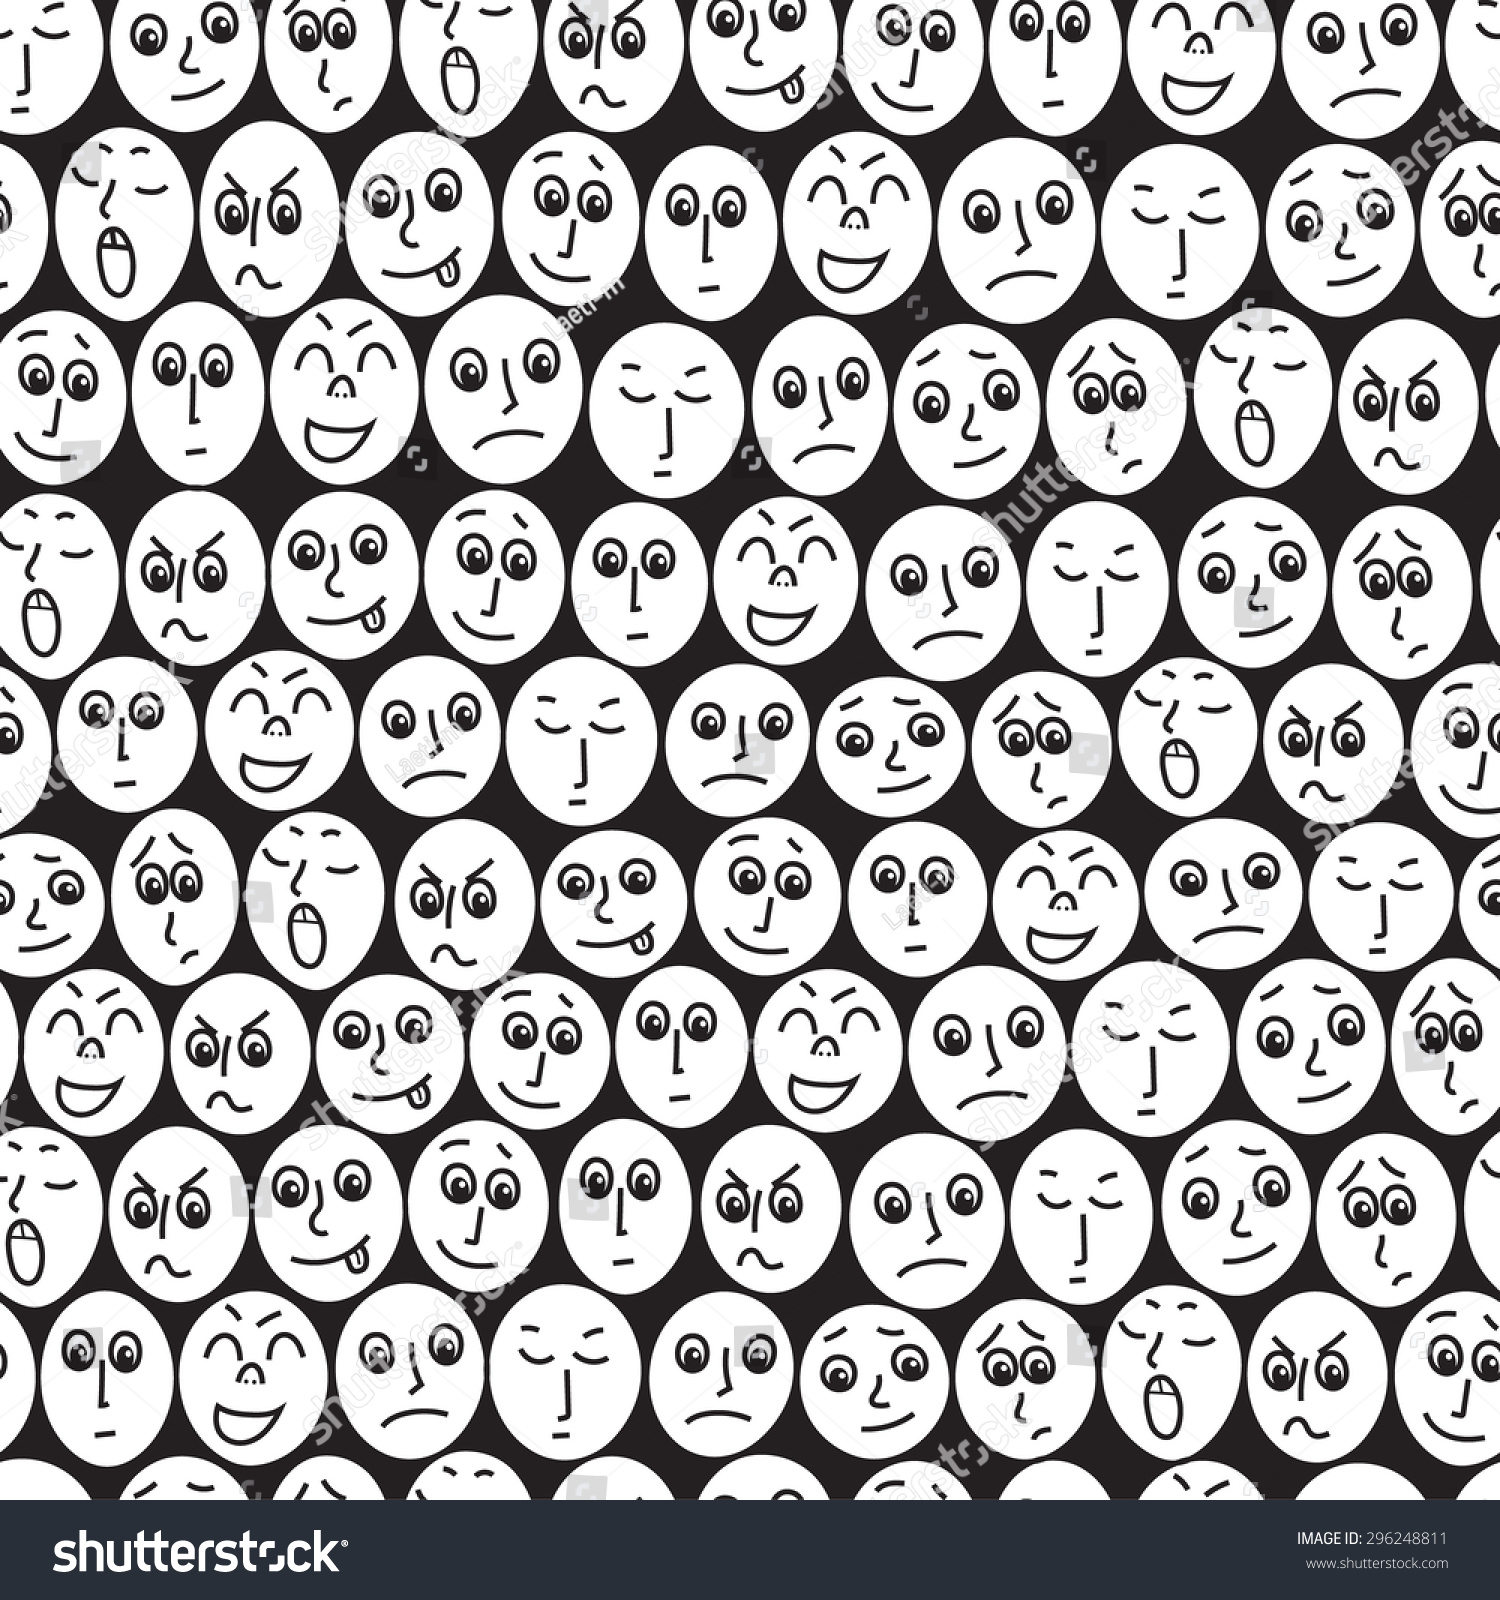 stock-vector-the-face-of-people-with-a-different-mood-seamless-pattern-of-hand-draw-people-s-faces-funny-296248811.jpg